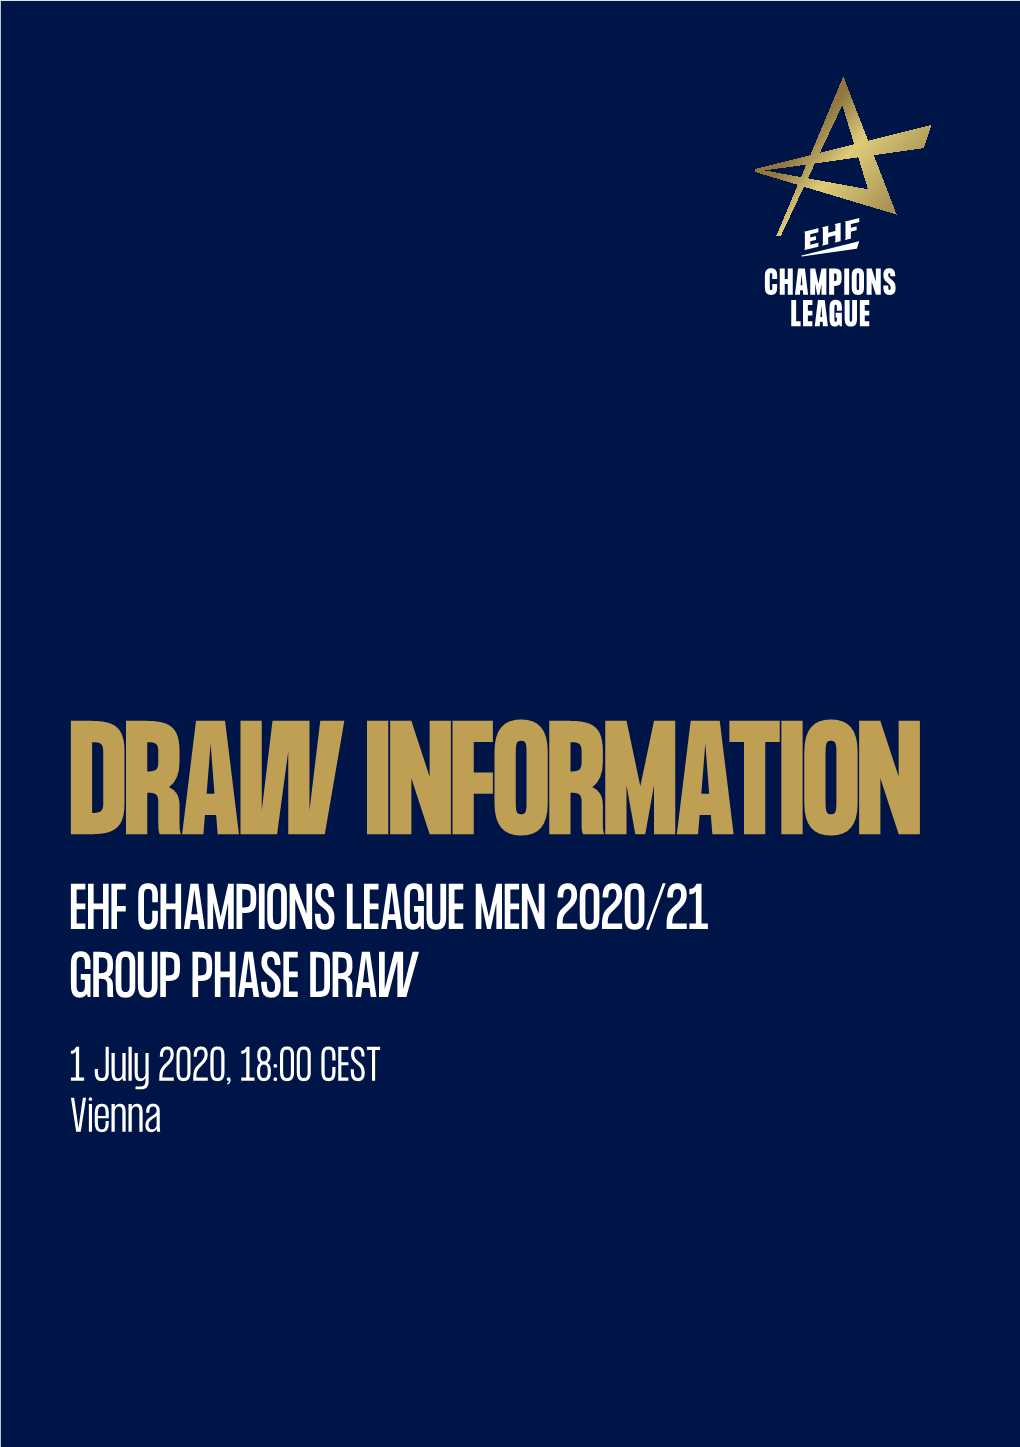 Delo Ehf Champions League 2020/21 Group Phase Draw